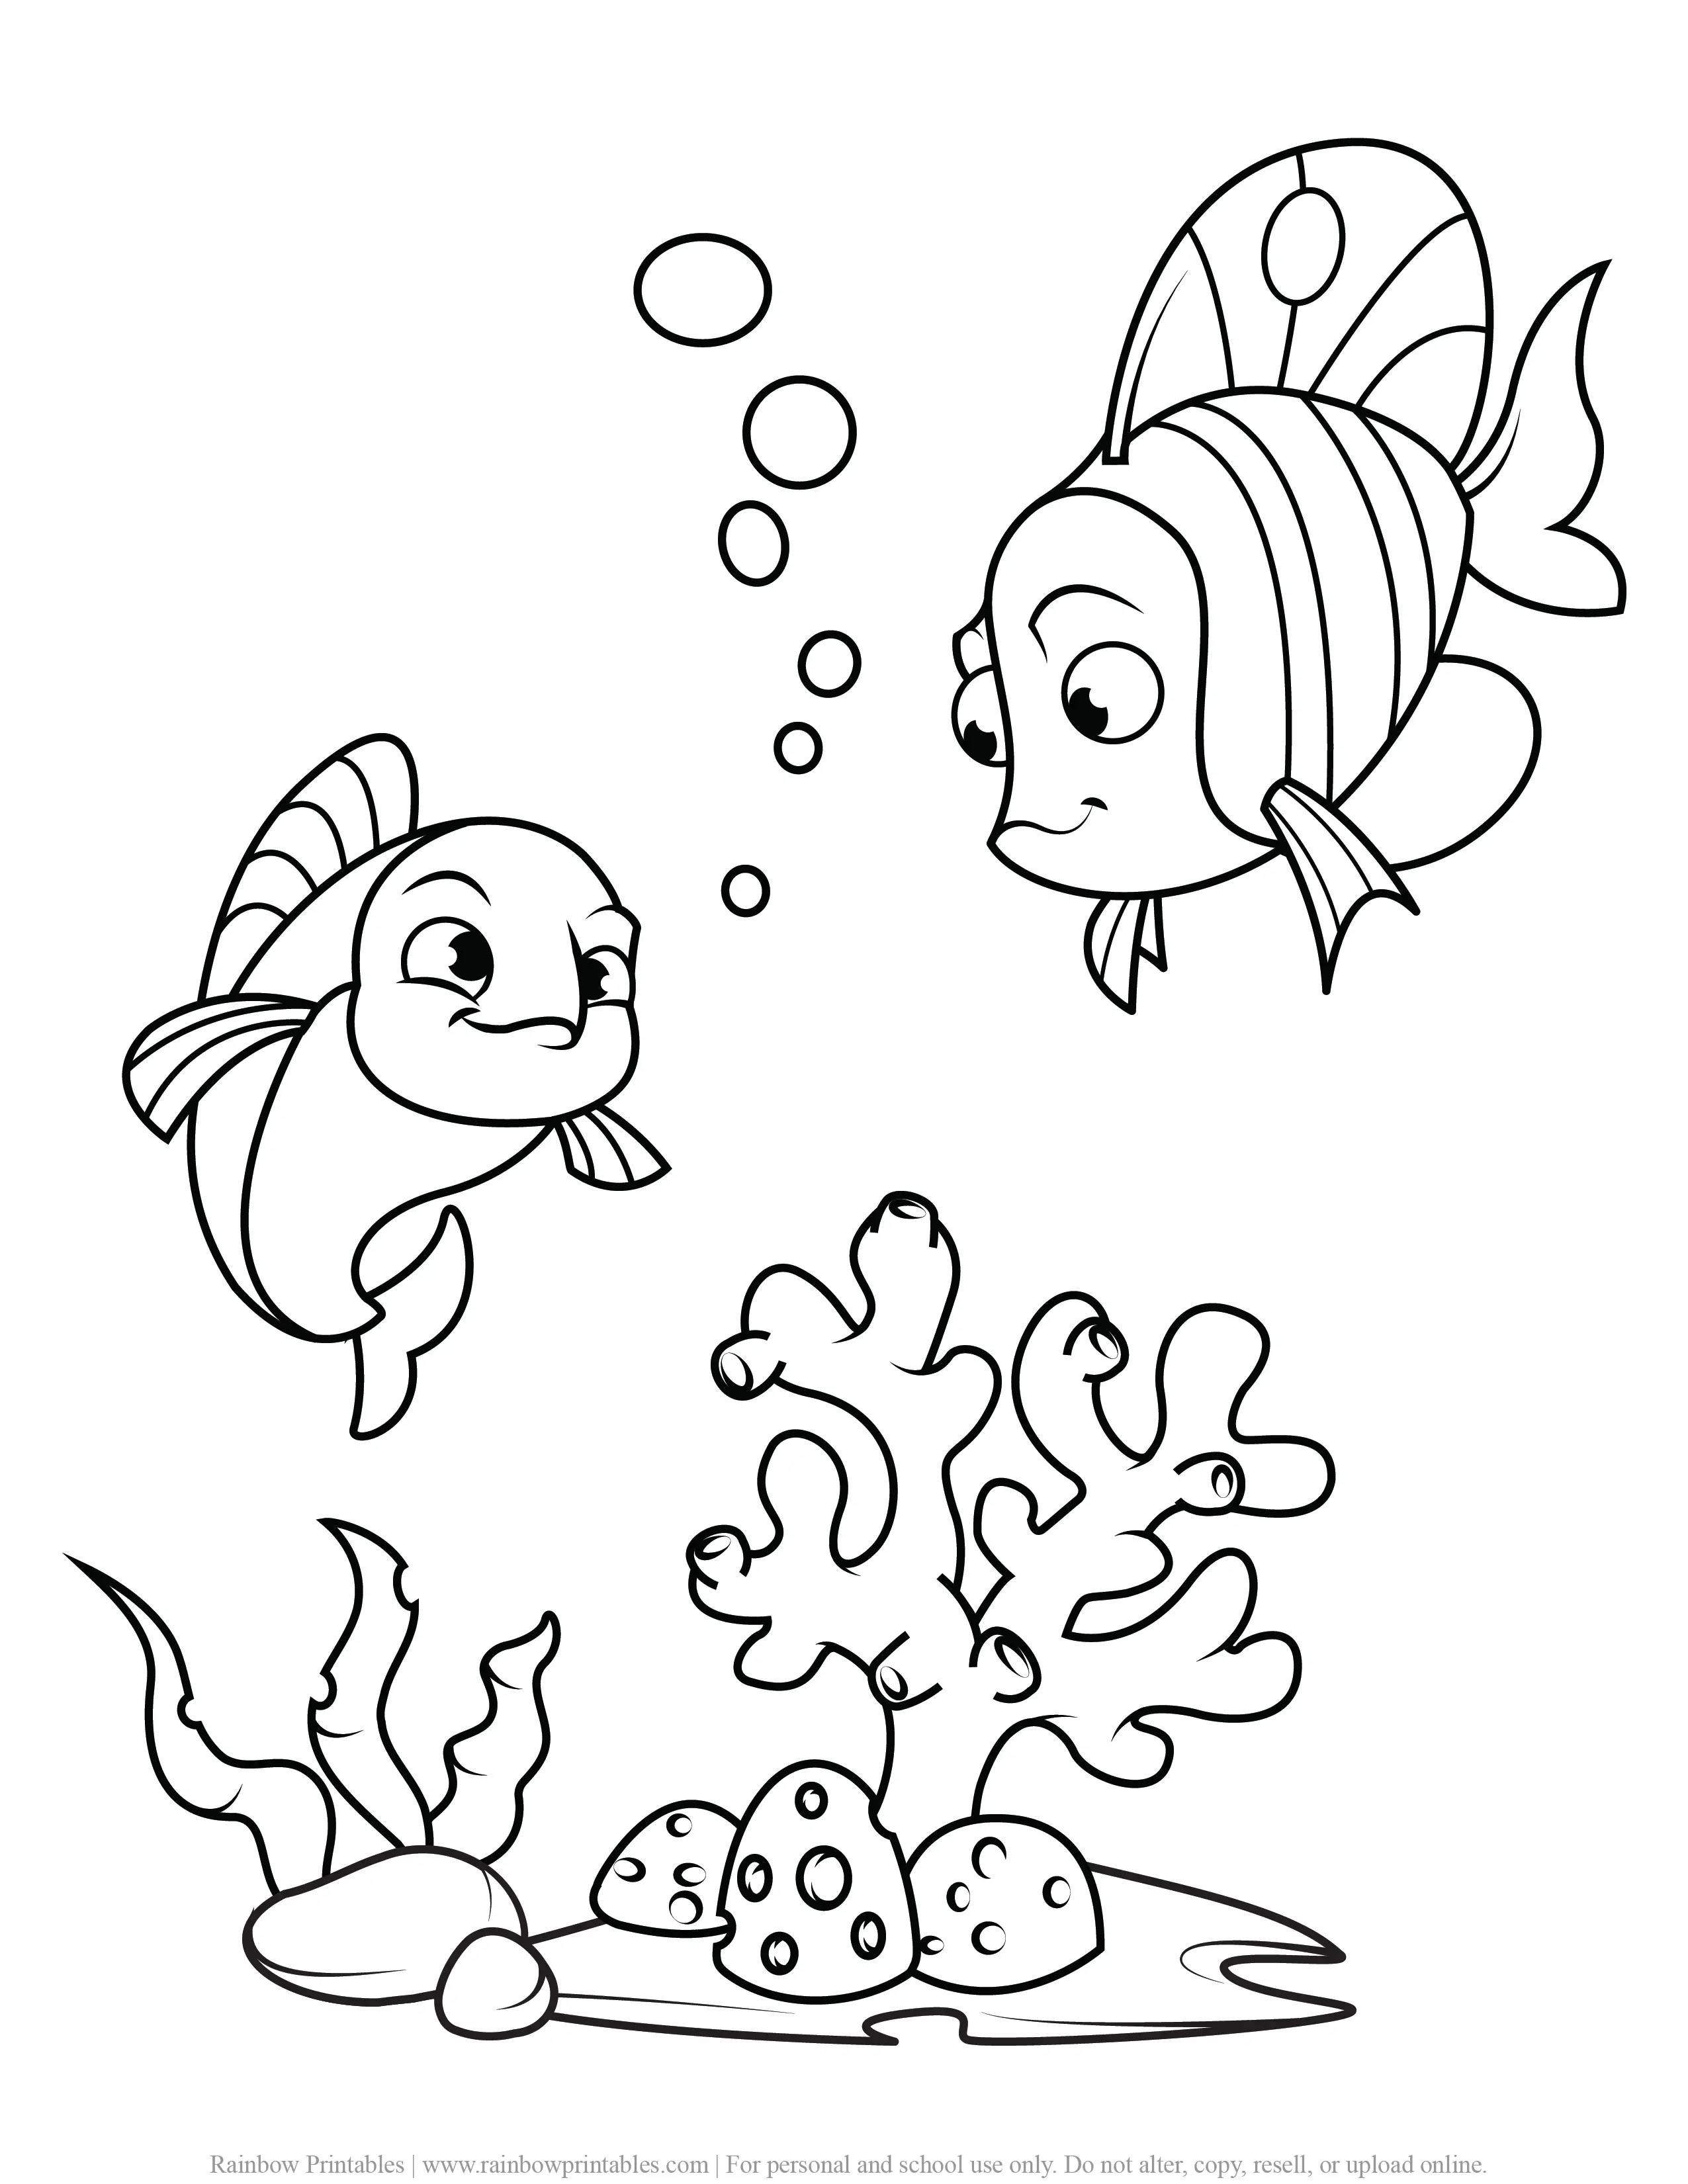 Under The Sea Ocean Animals Coloring Pages - Rainbow Printables